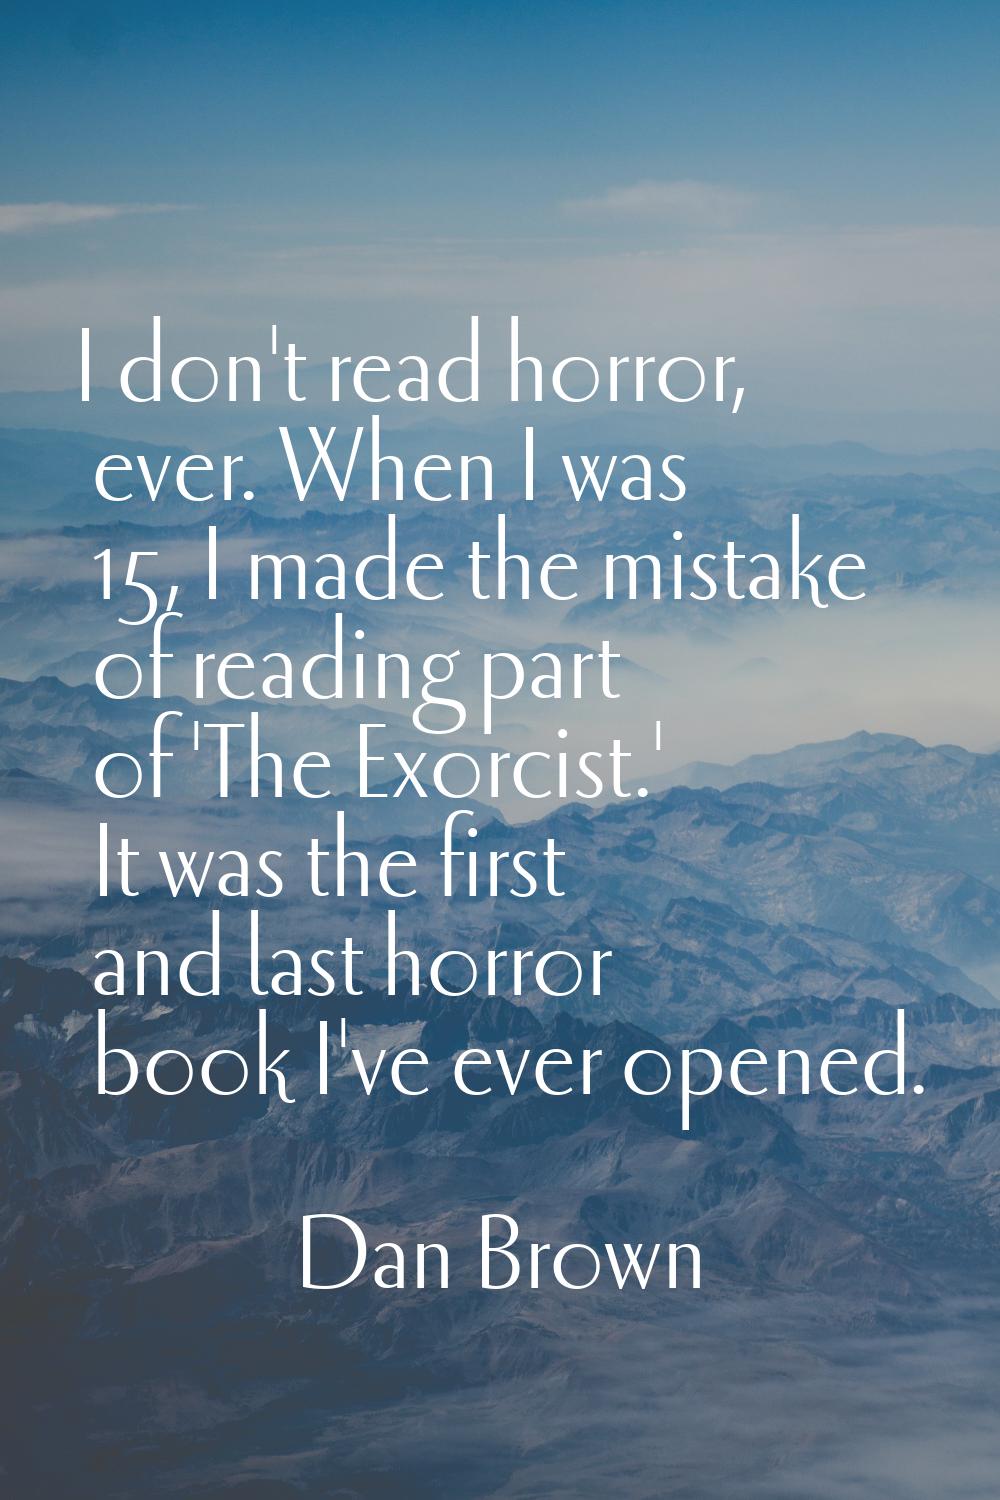 I don't read horror, ever. When I was 15, I made the mistake of reading part of 'The Exorcist.' It 